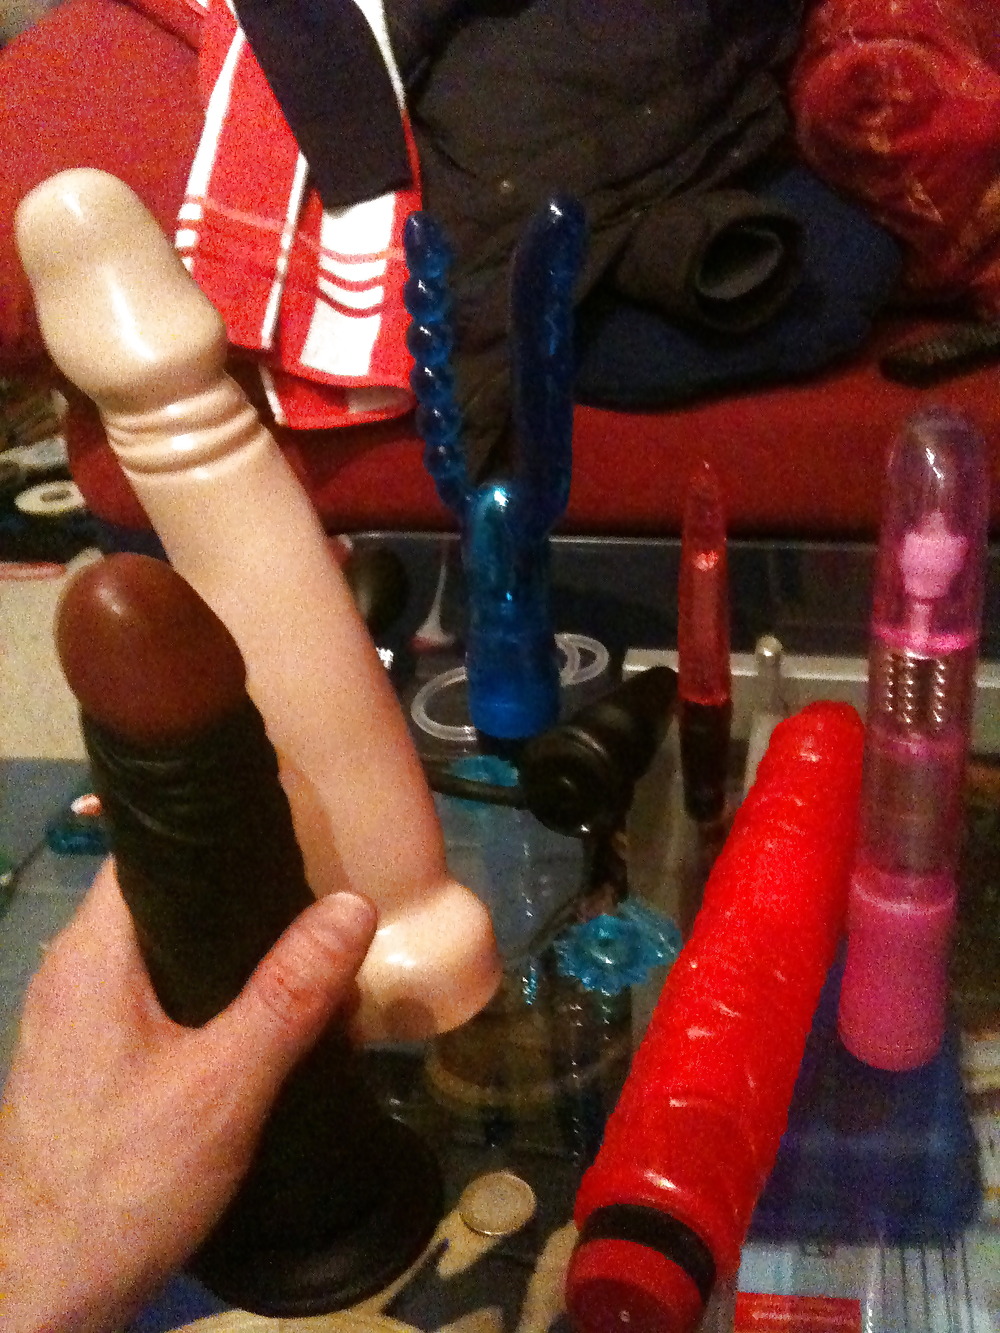 My toys for you #2689872